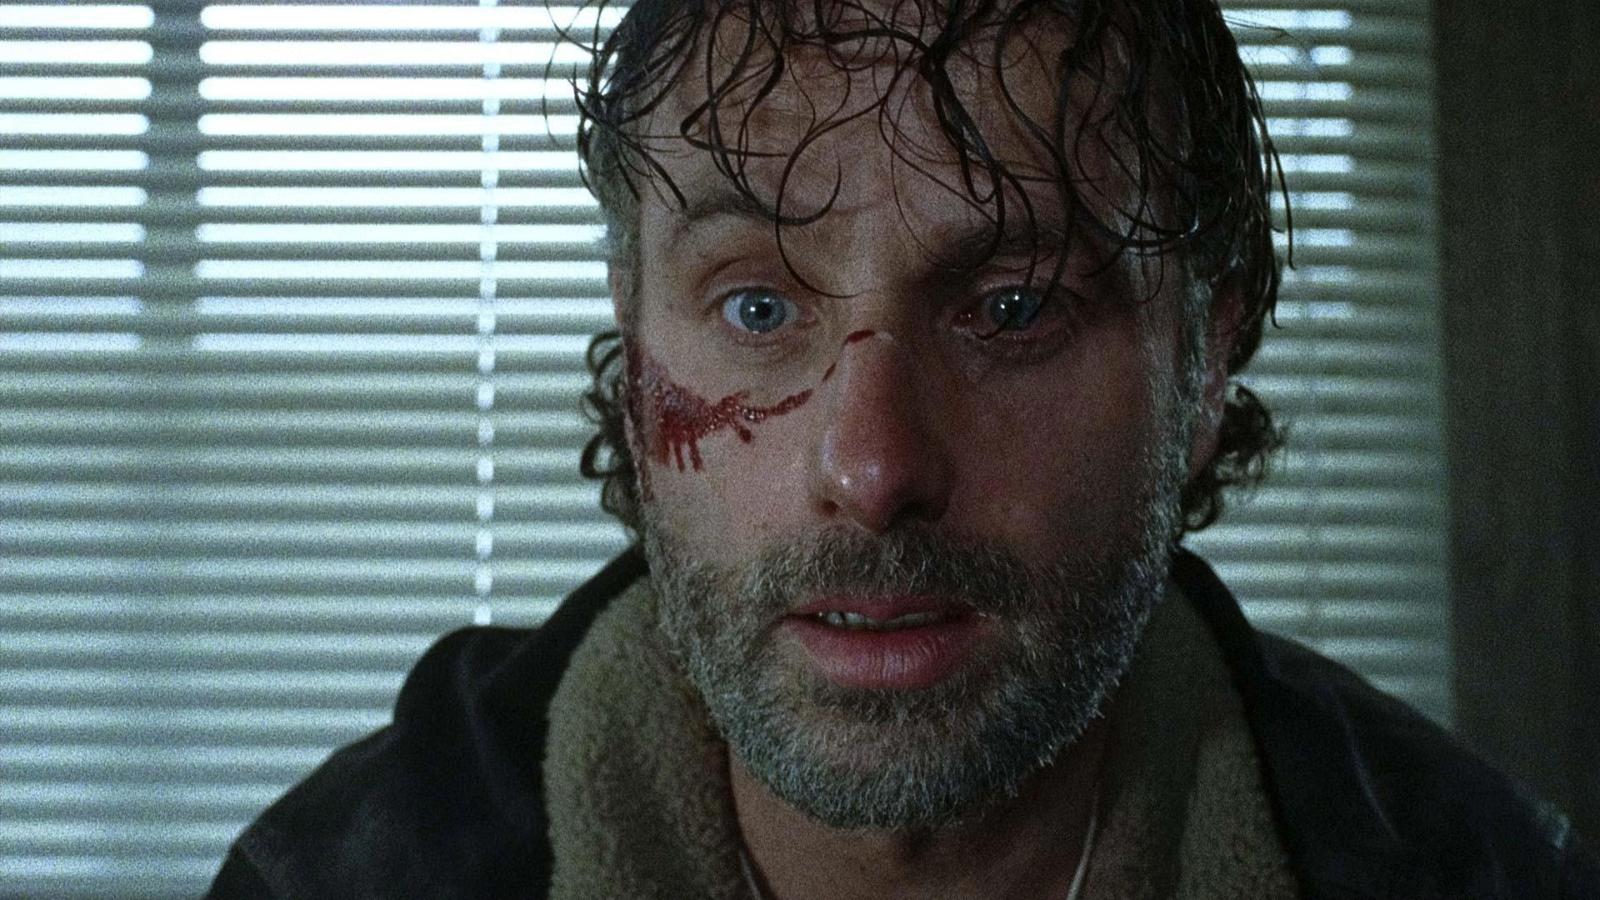 Andrew Lincoln as Rick Grimes in The Walking Dead, with blood on his face